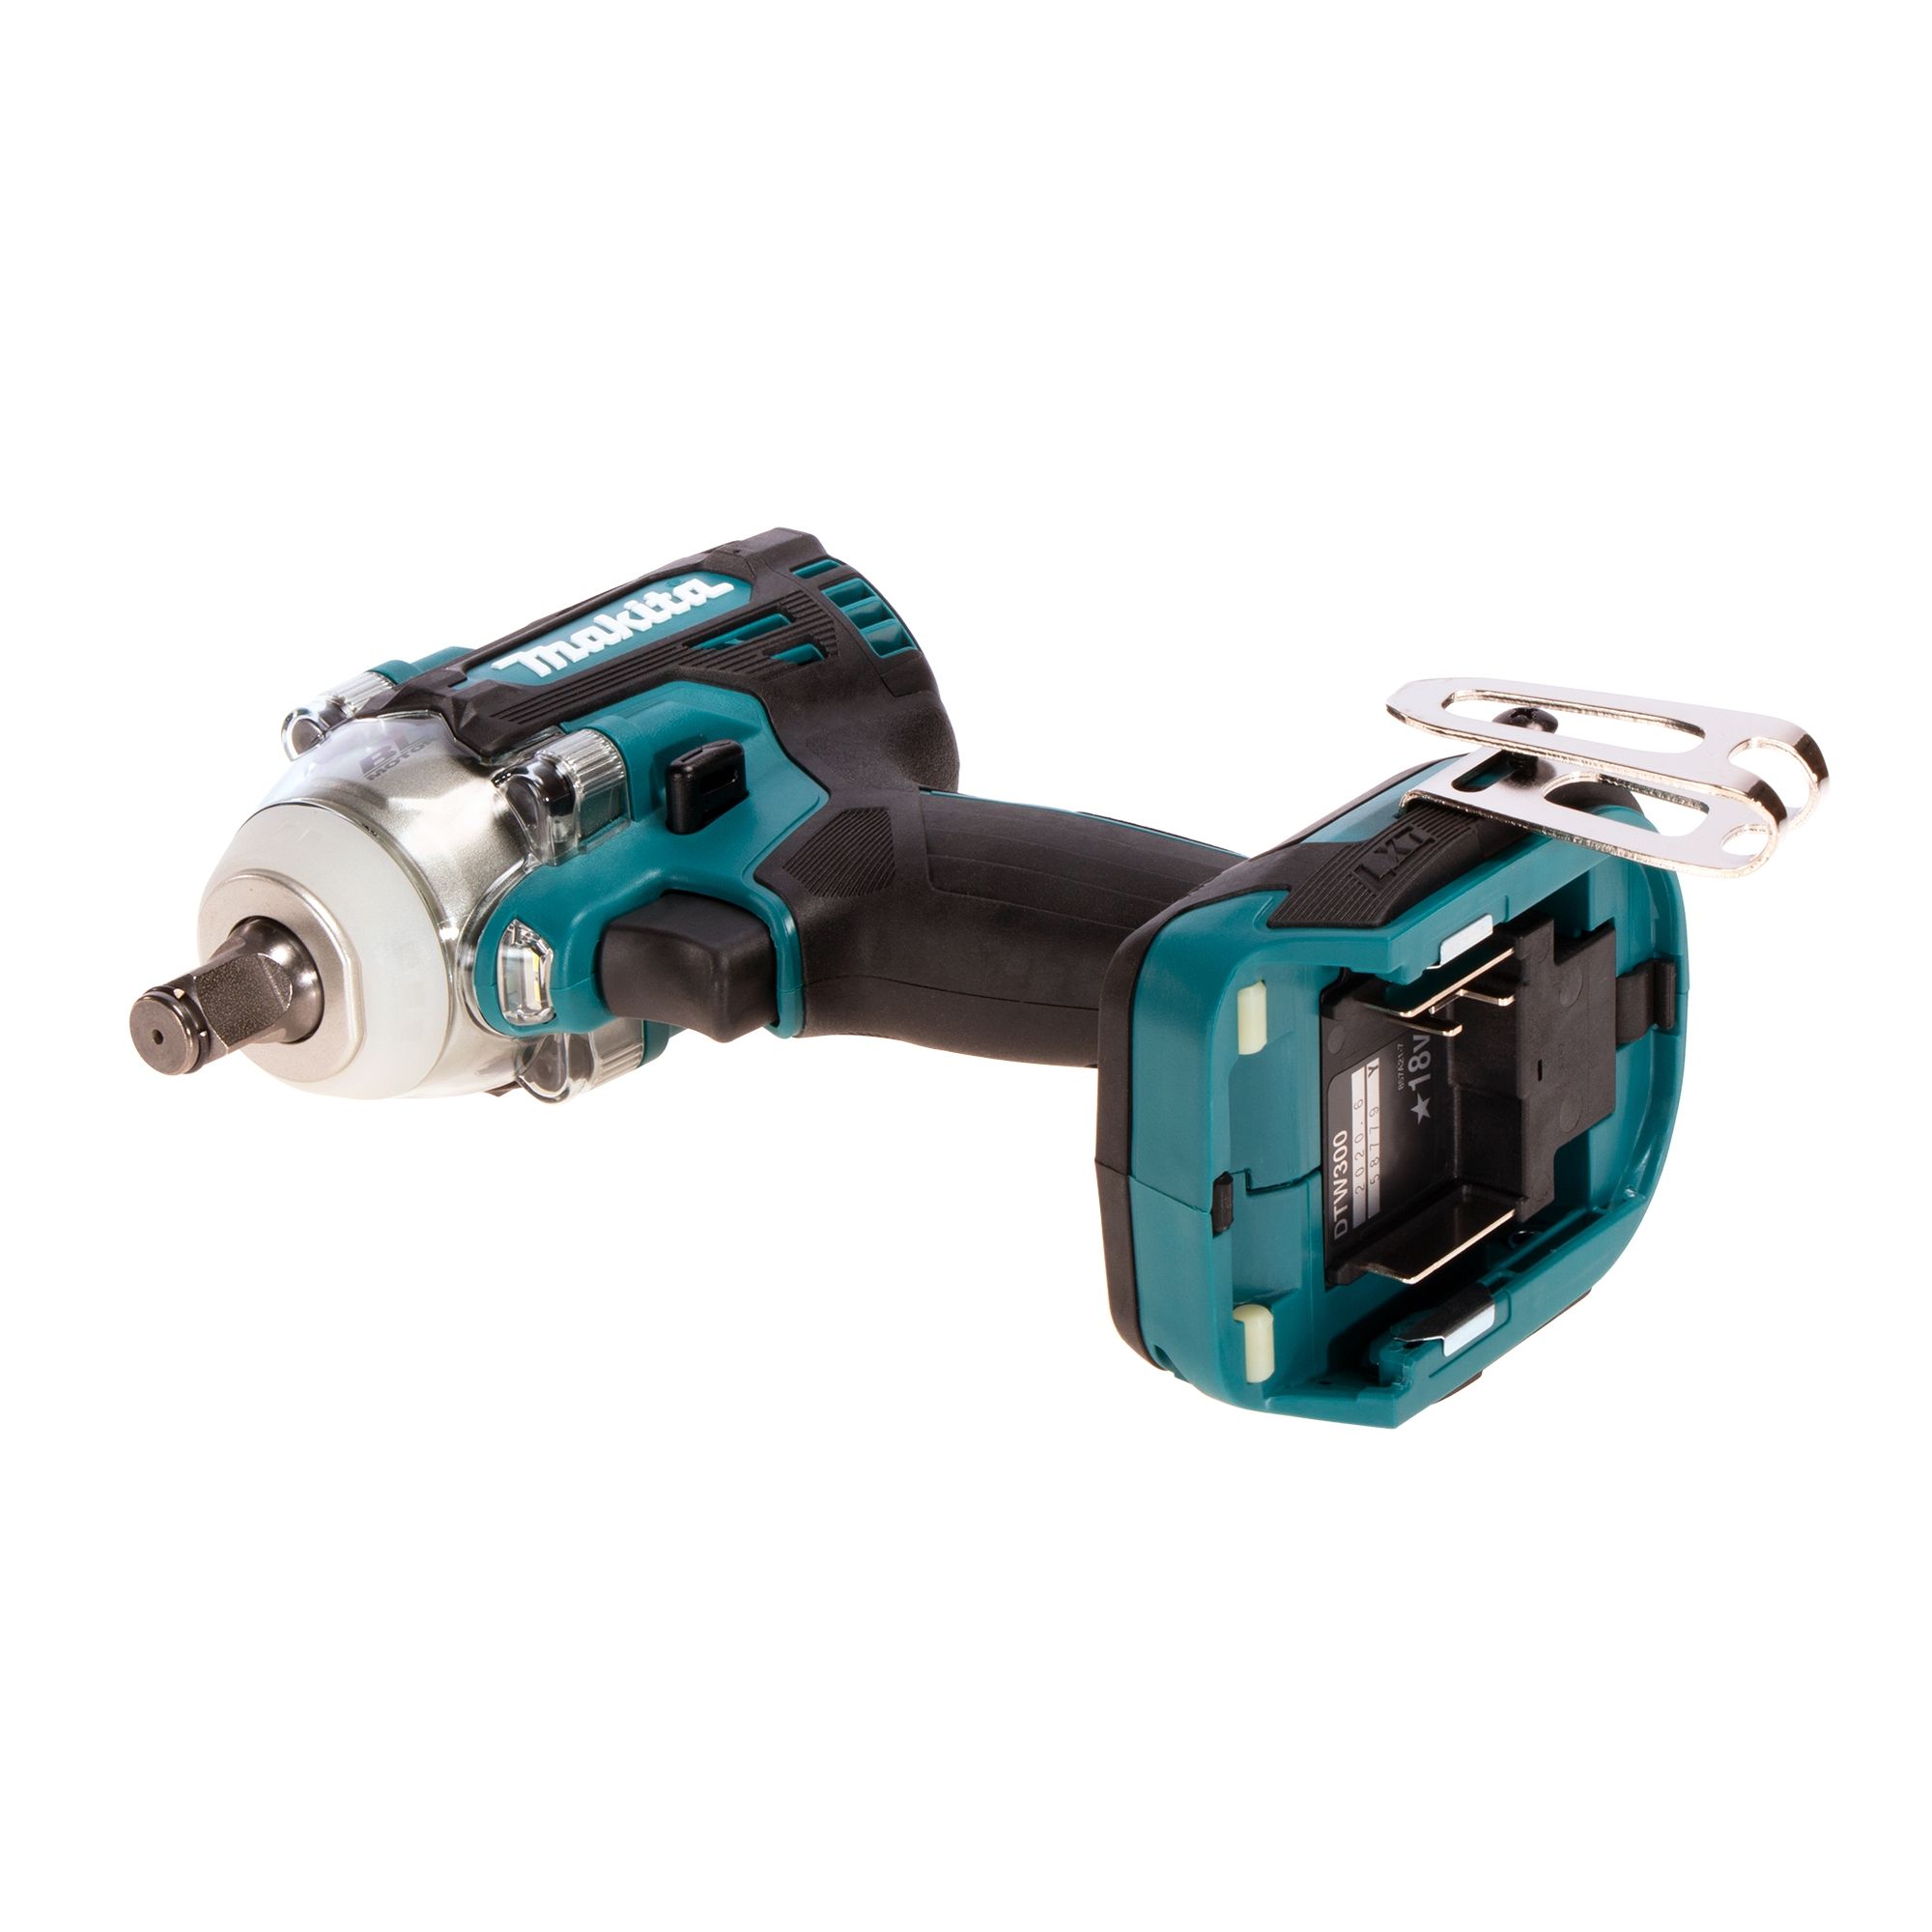 Makita DTW300XVZ 18V LXT Lithium-Ion Brushless Cordless 4-Speed 1/2 Sq Tool Only Drive Impact Wrench w/Friction Ring